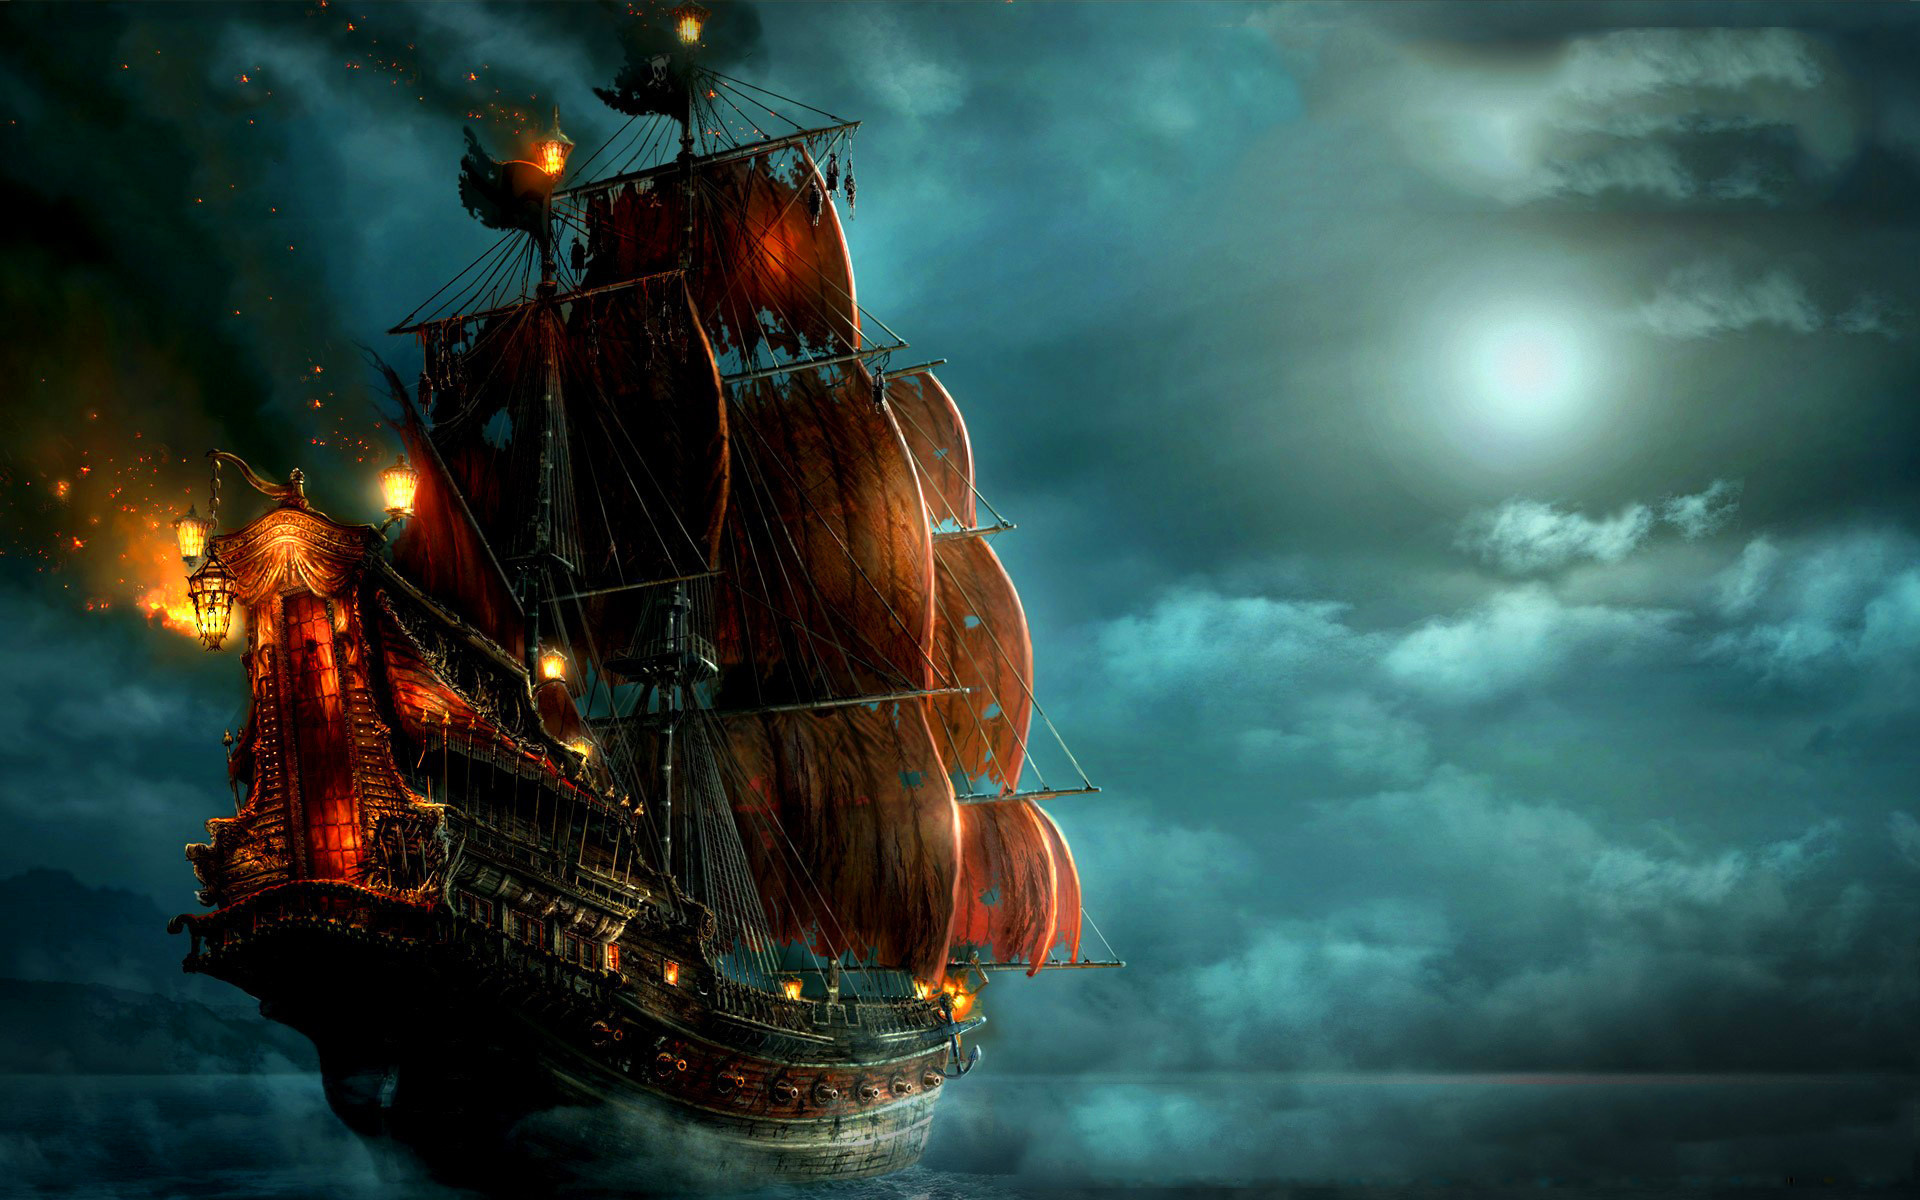 pirates of the caribbean, movie, pirates of the caribbean: on stranger tides, ship